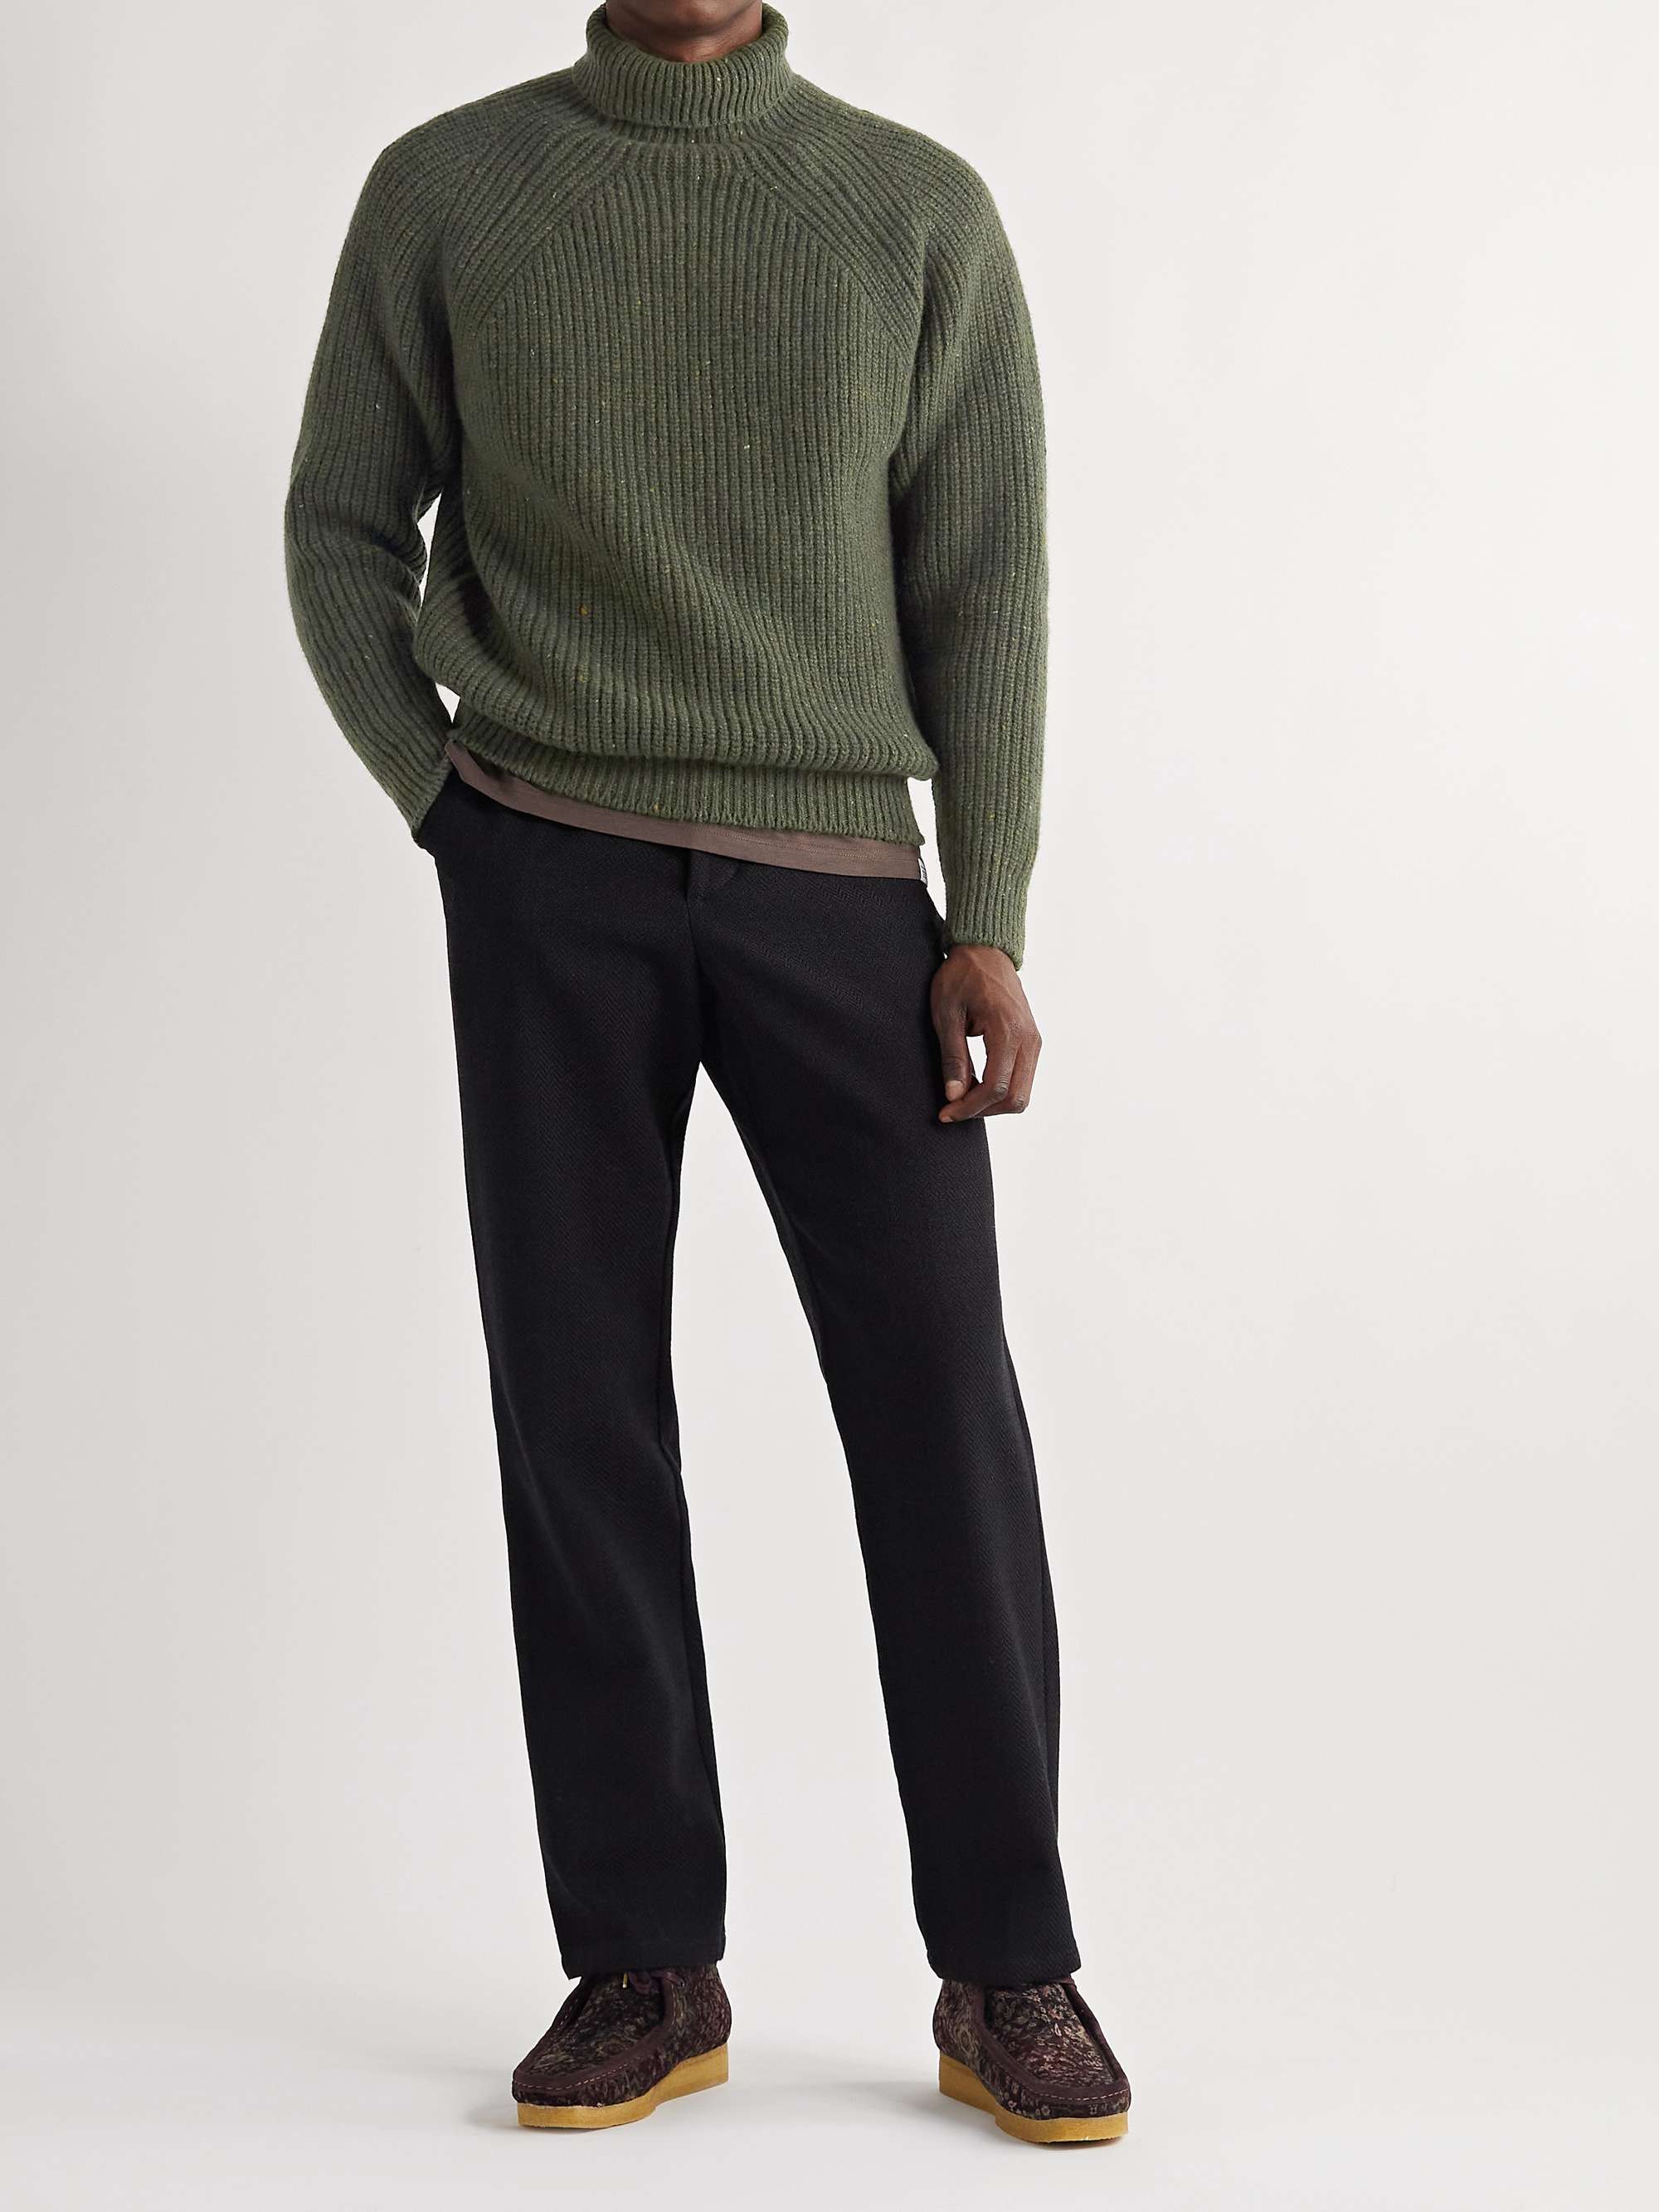 INIS MEÁIN Boatbuilder Ribbed Donegal Merino Wool and Cashmere-Blend Rollneck Sweater